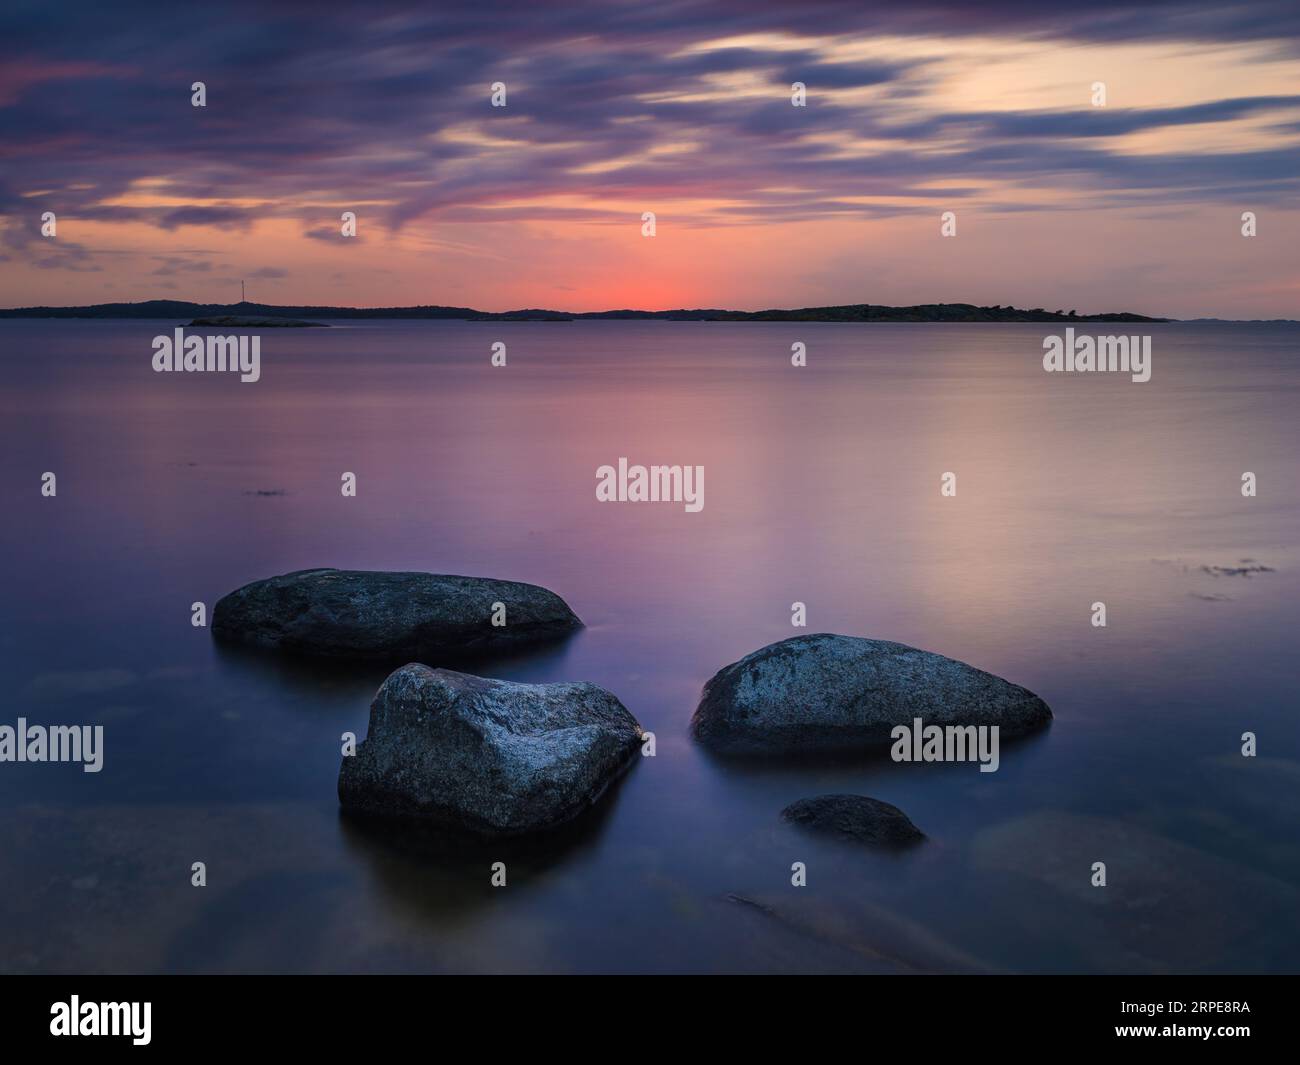 Nature's beauty at Sweden's coast: tranquil beach, sunset, ocean reflection, rocky shoreline. Stock Photo